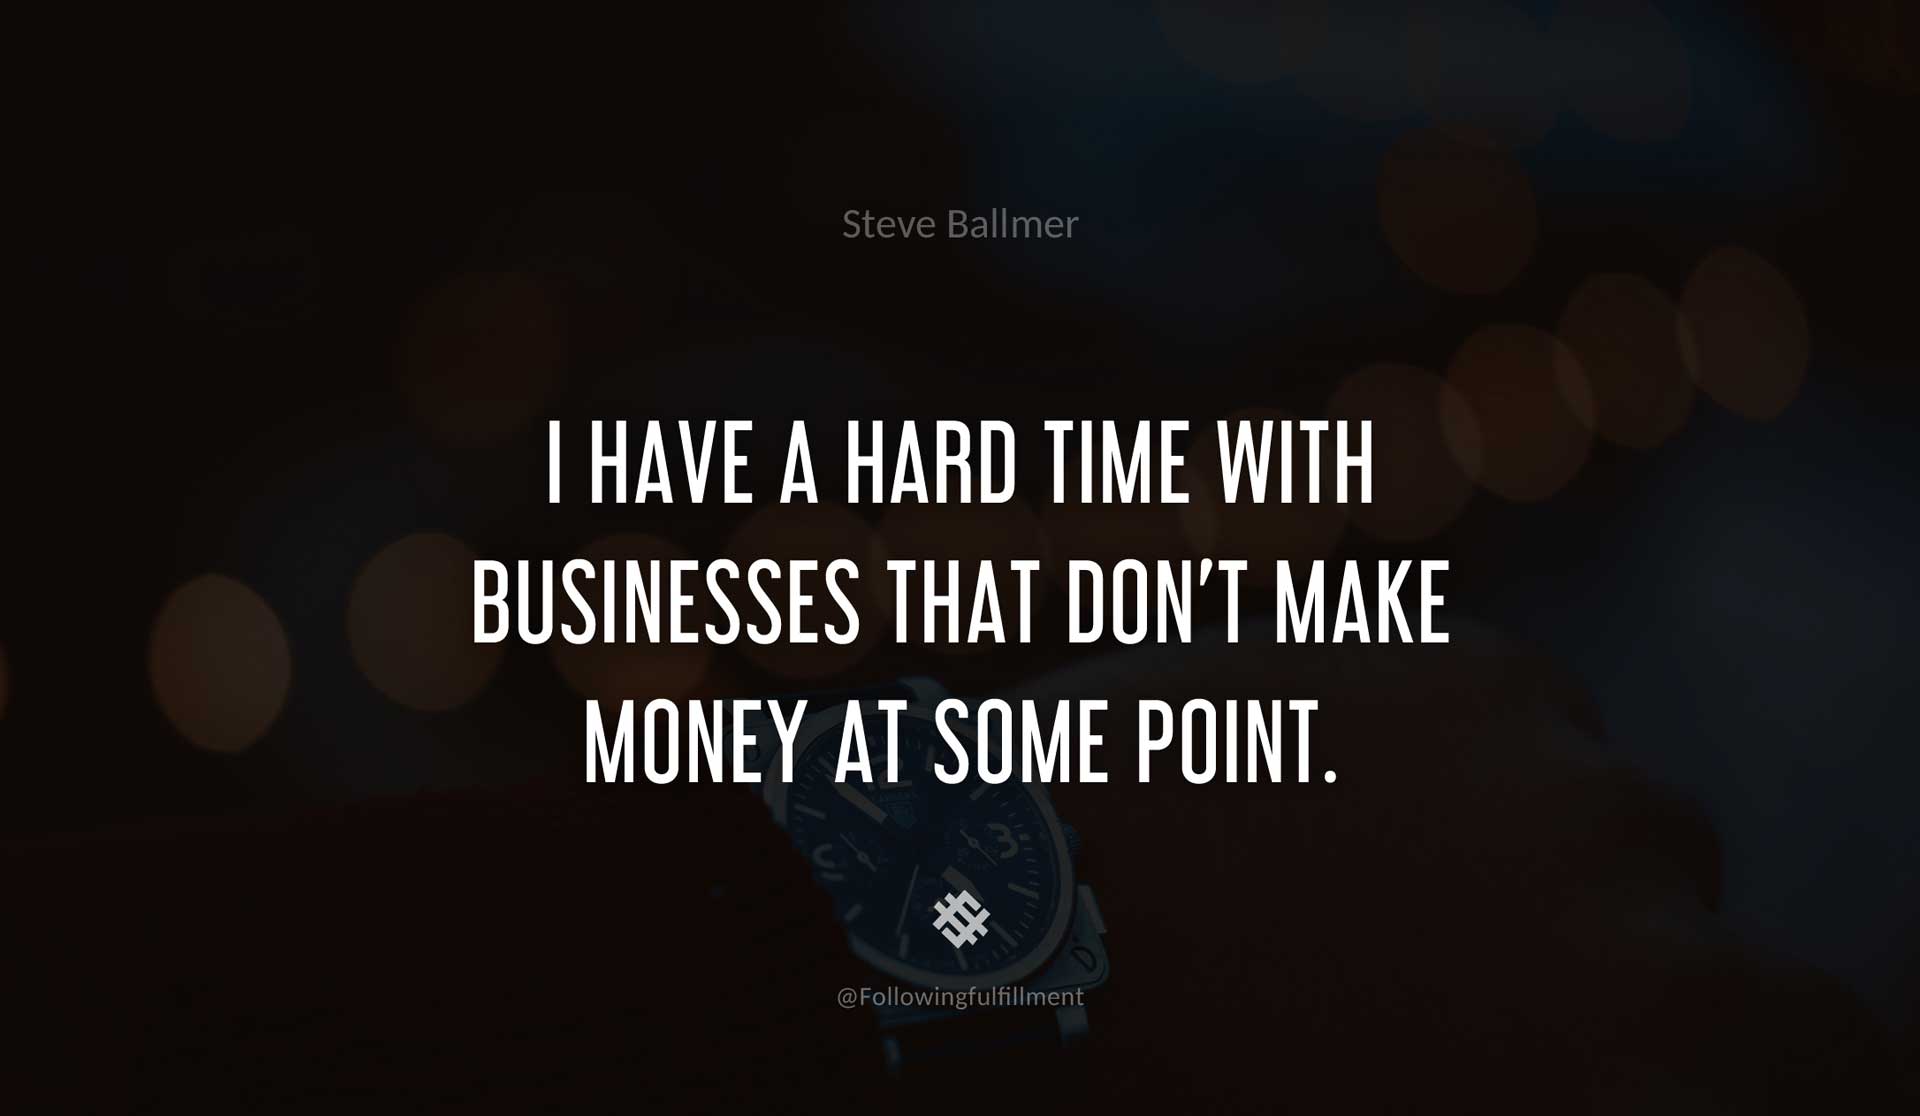 I-have-a-hard-time-with-businesses-that-don't-make-money-at-some-point.-STEVE-BALLMER-Quote.jpg